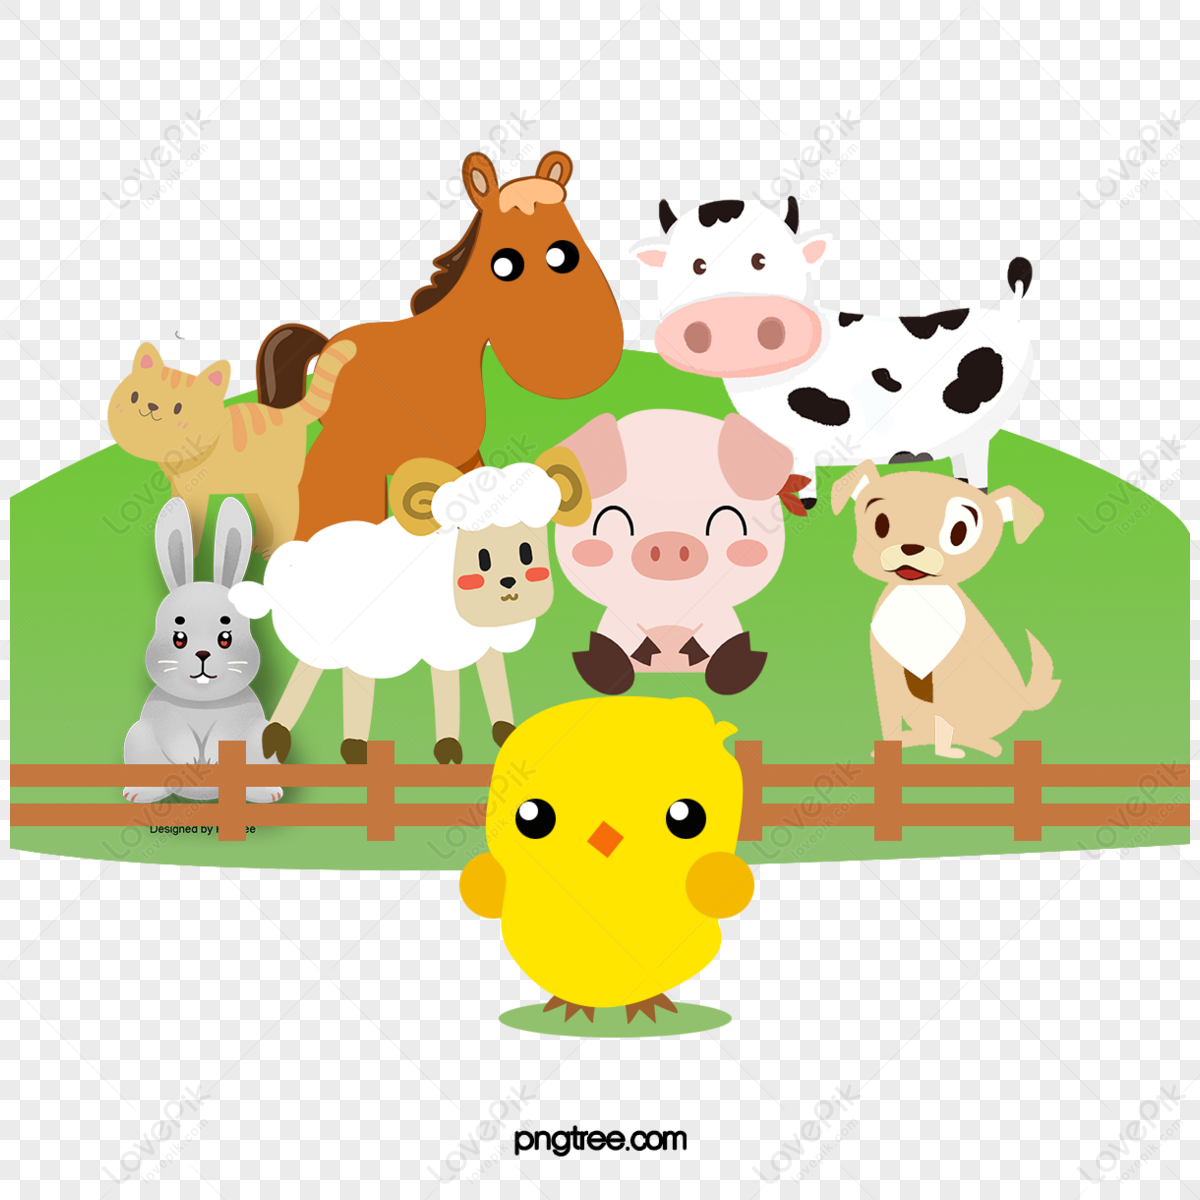 Farm Animals Clipart PNG Images With Transparent Background | Free ...